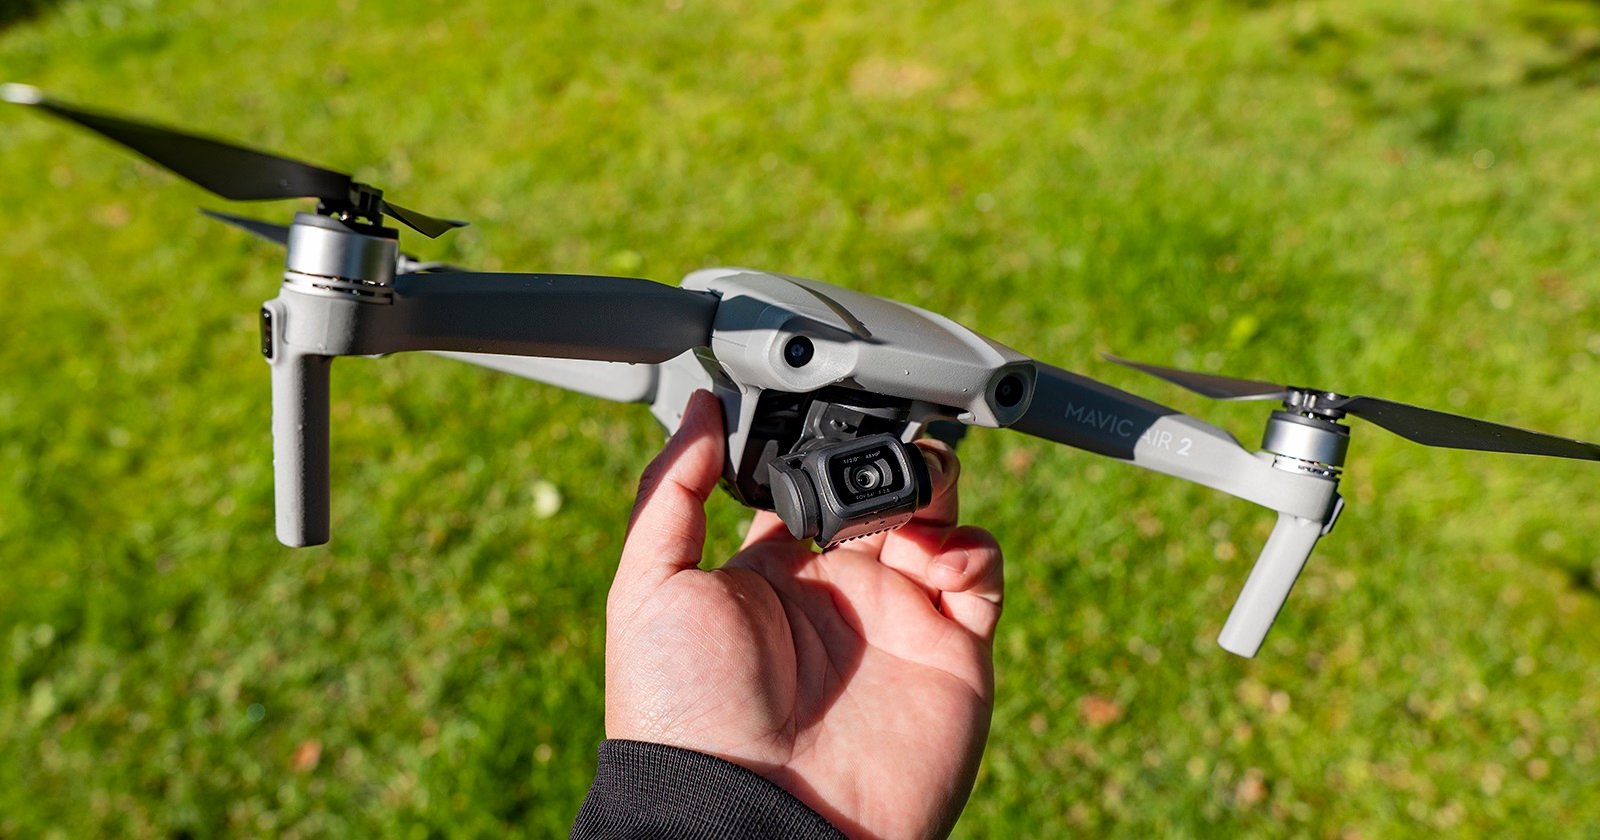 Review: The DJI Mavic Air 2 is a Good Drone with Consumer-Level Caveats